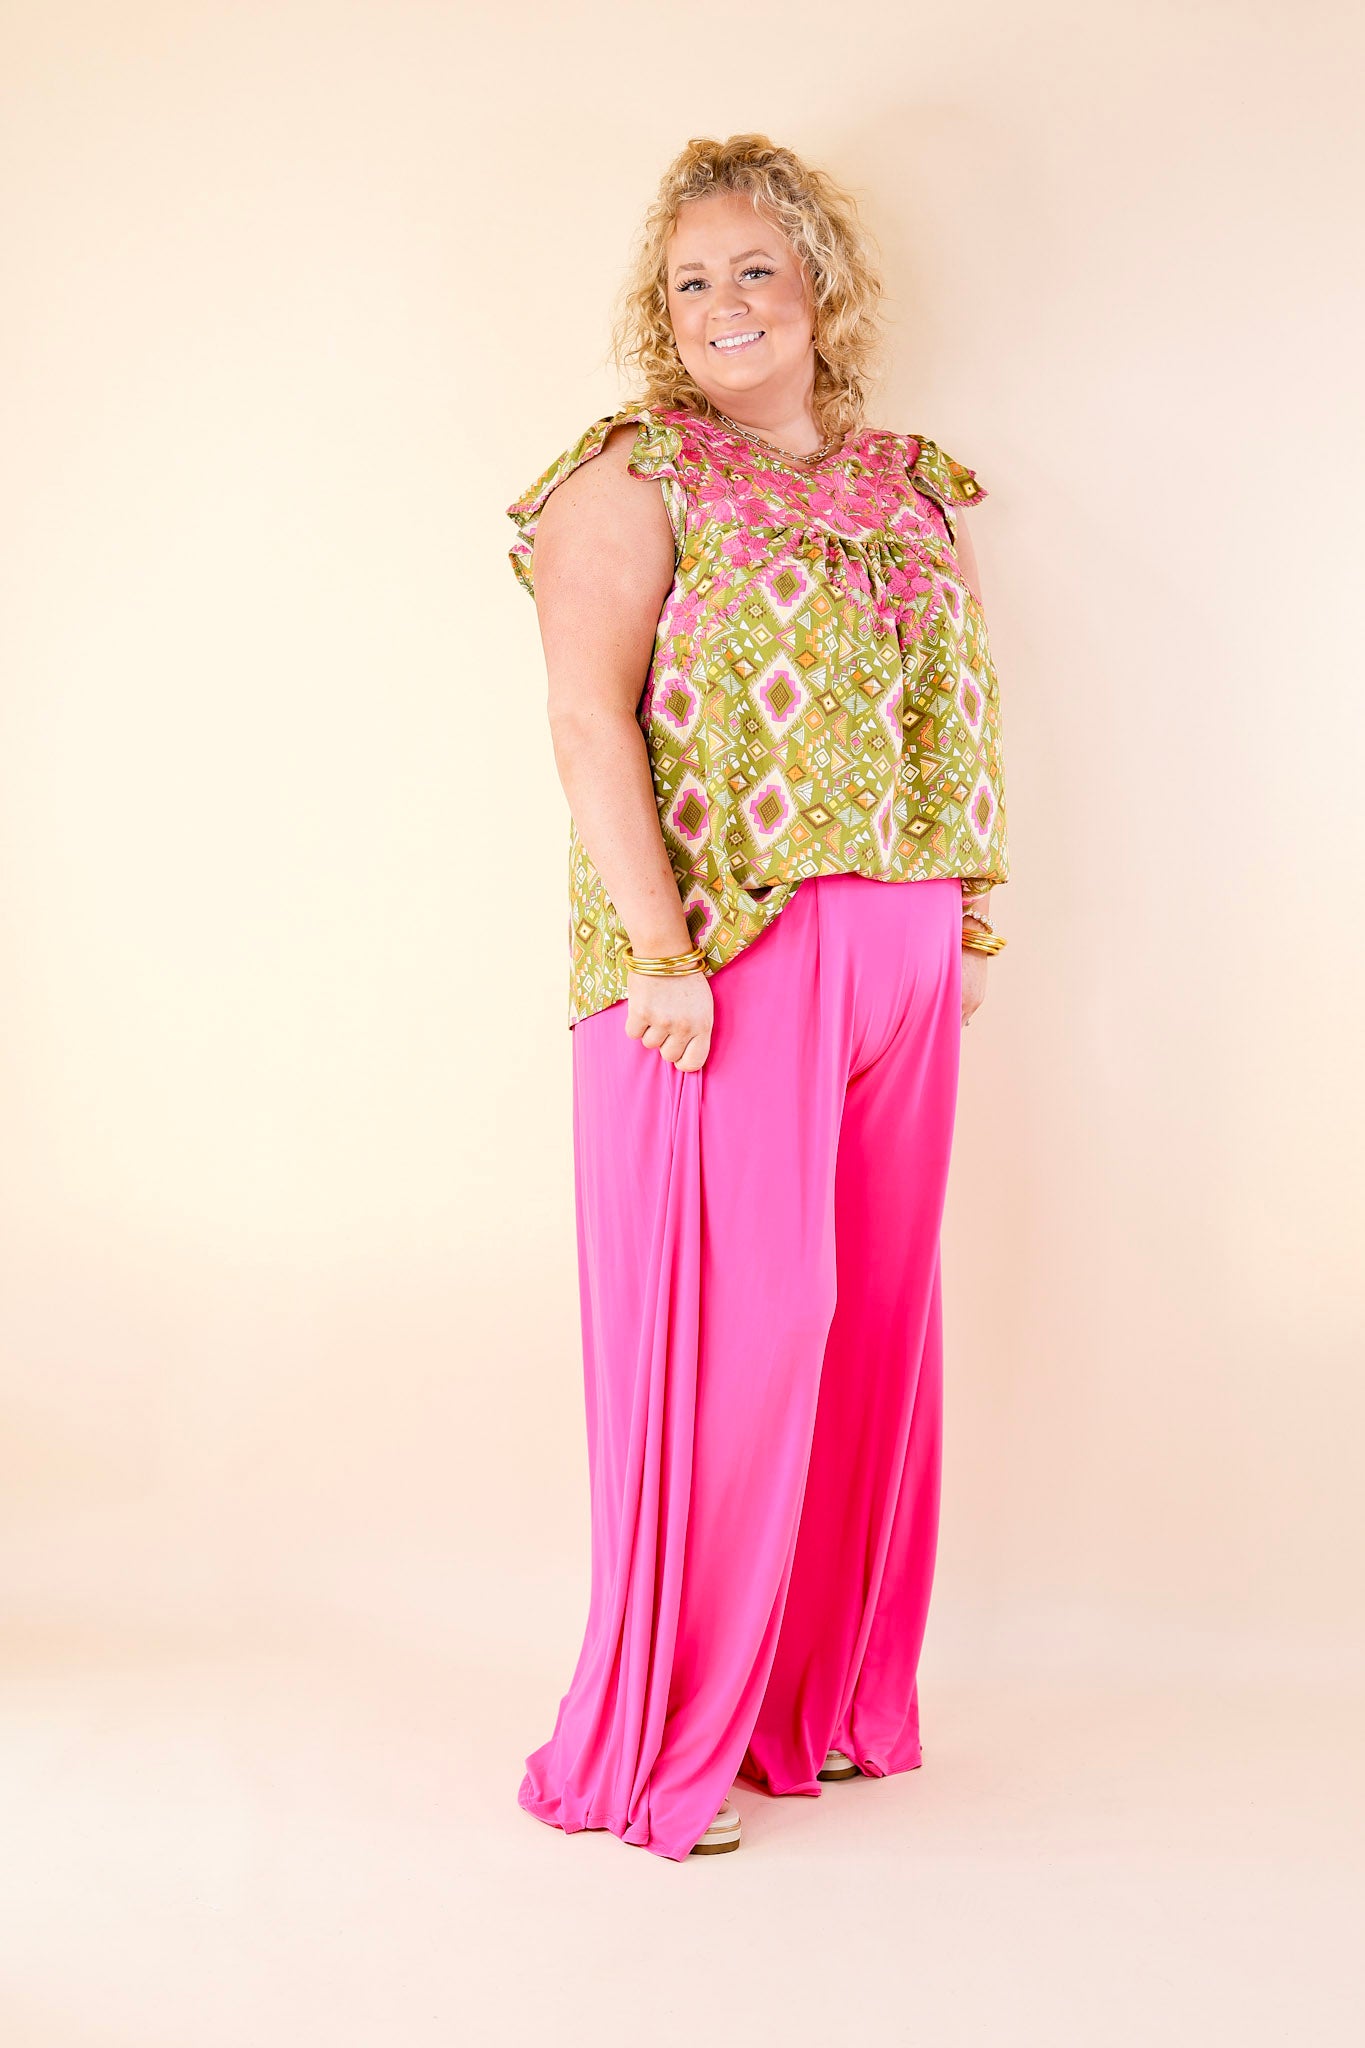 Plus Size | Urban Wonders Wide Leg Pants in Magenta Pink - Giddy Up Glamour Boutique